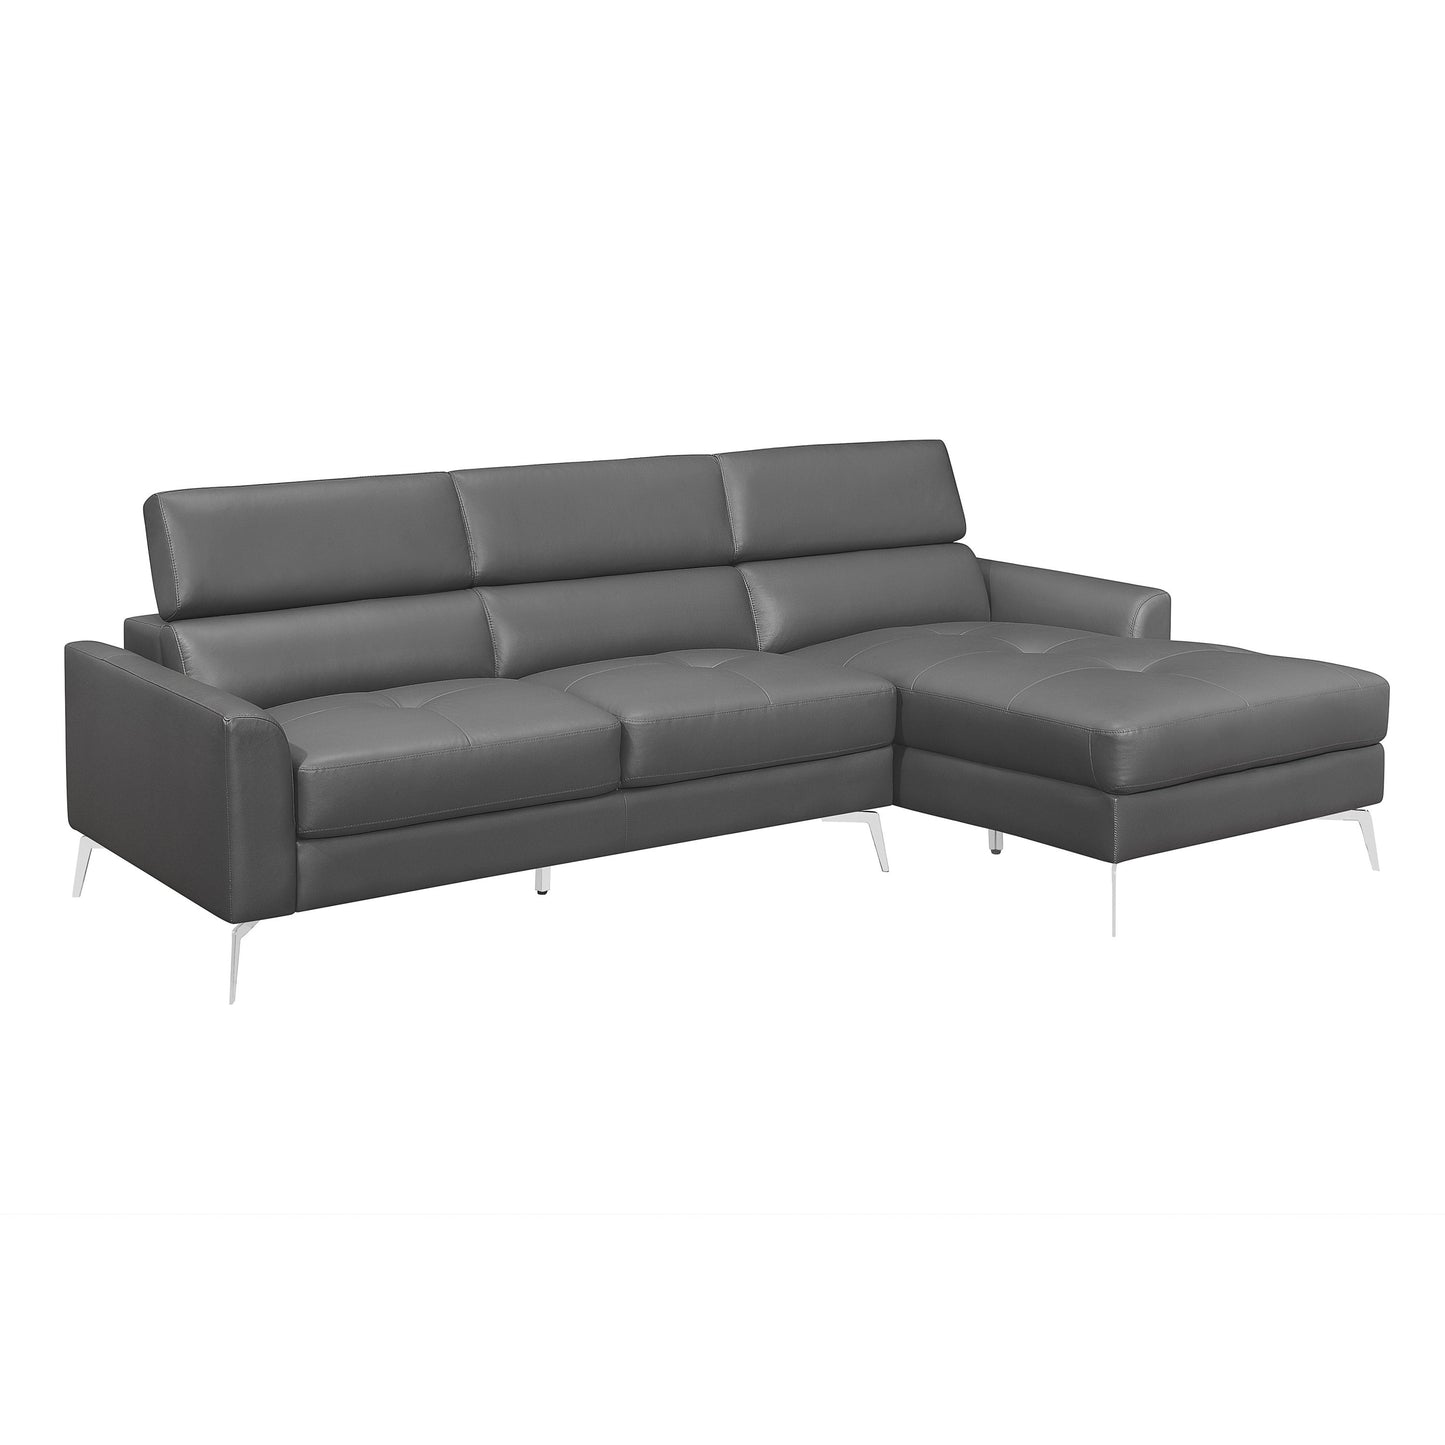 Ashland Top Grain Leather Sectional RAF Only GREY ONLY